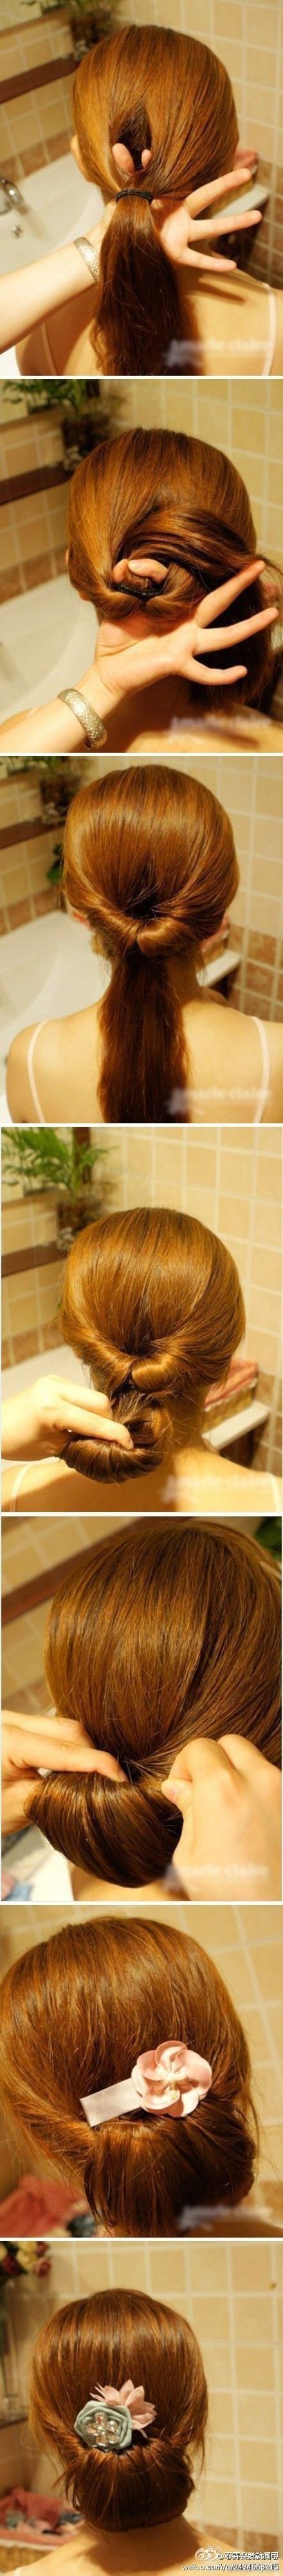 Thats easy! I can never get my hair to look good in a bun… I'm going to do